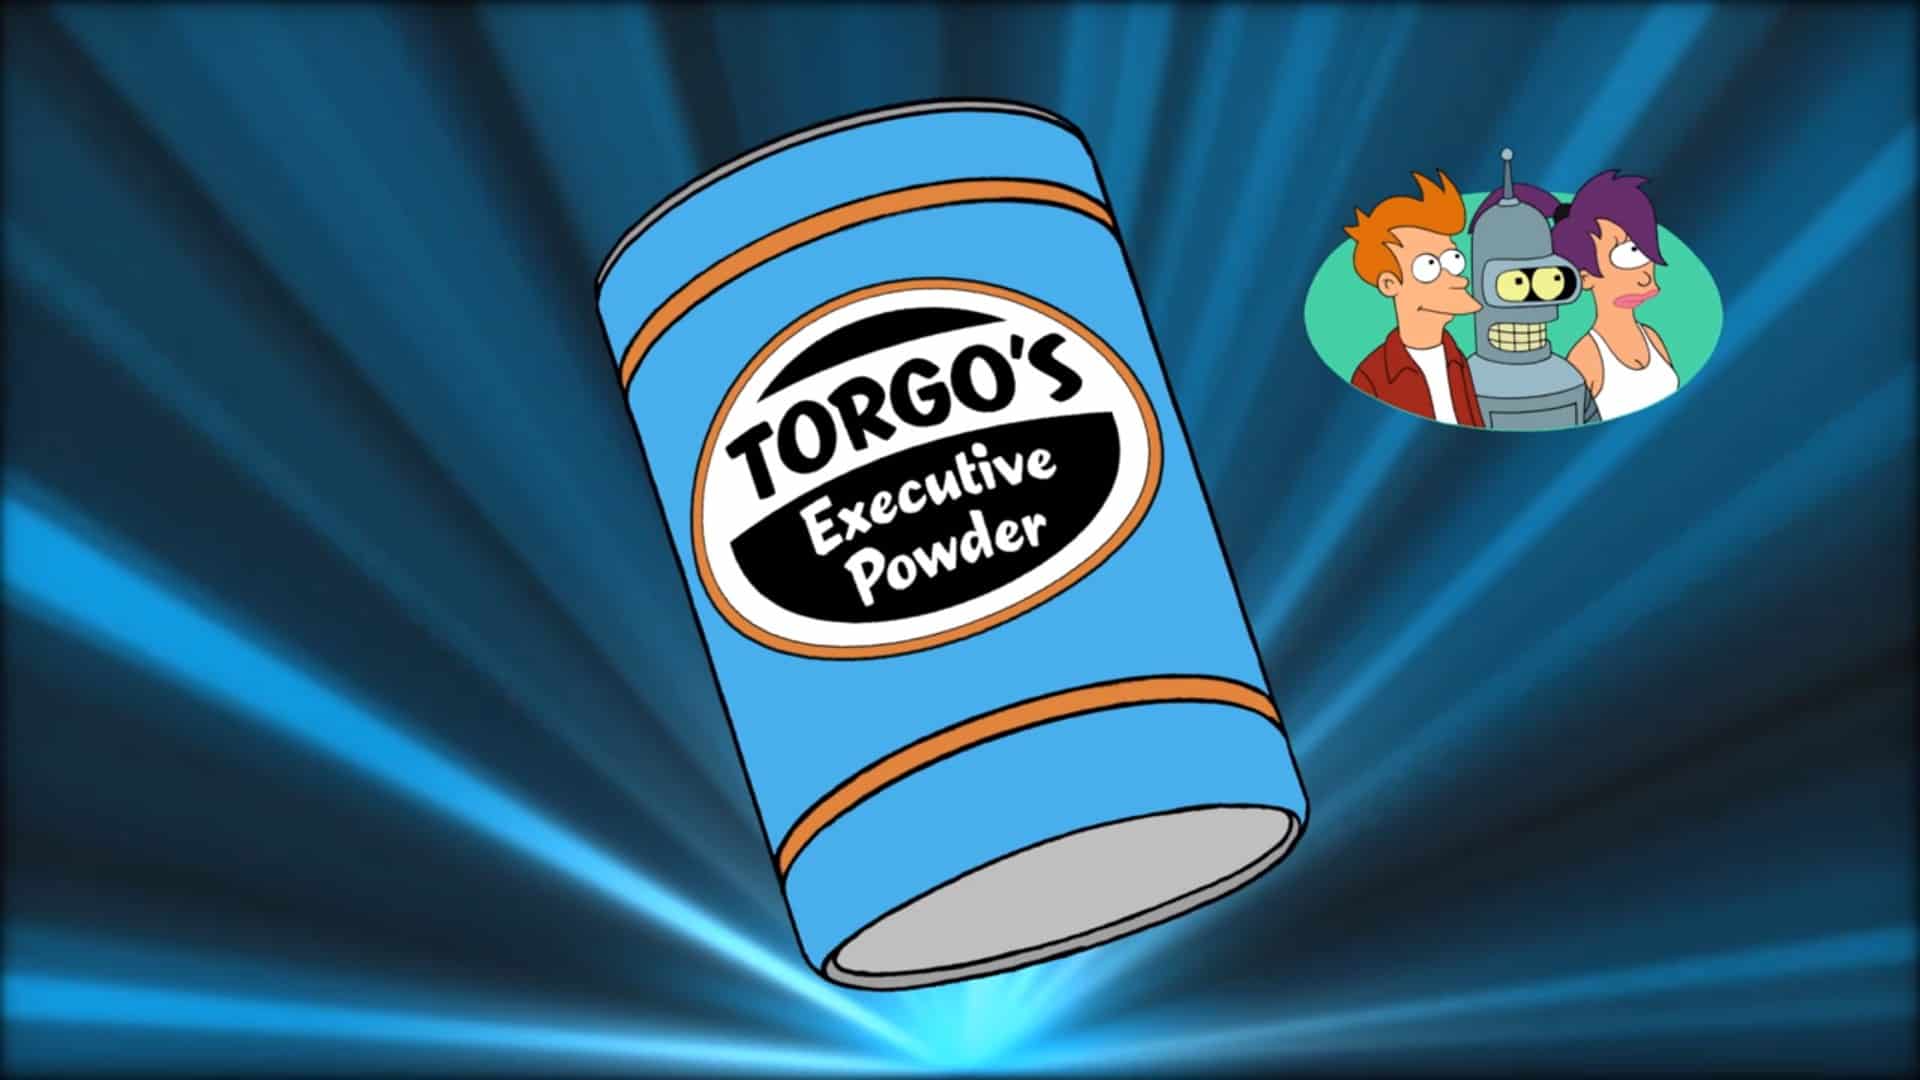 Torgo’s Executive Powder in this image from 20th Century Fox Television